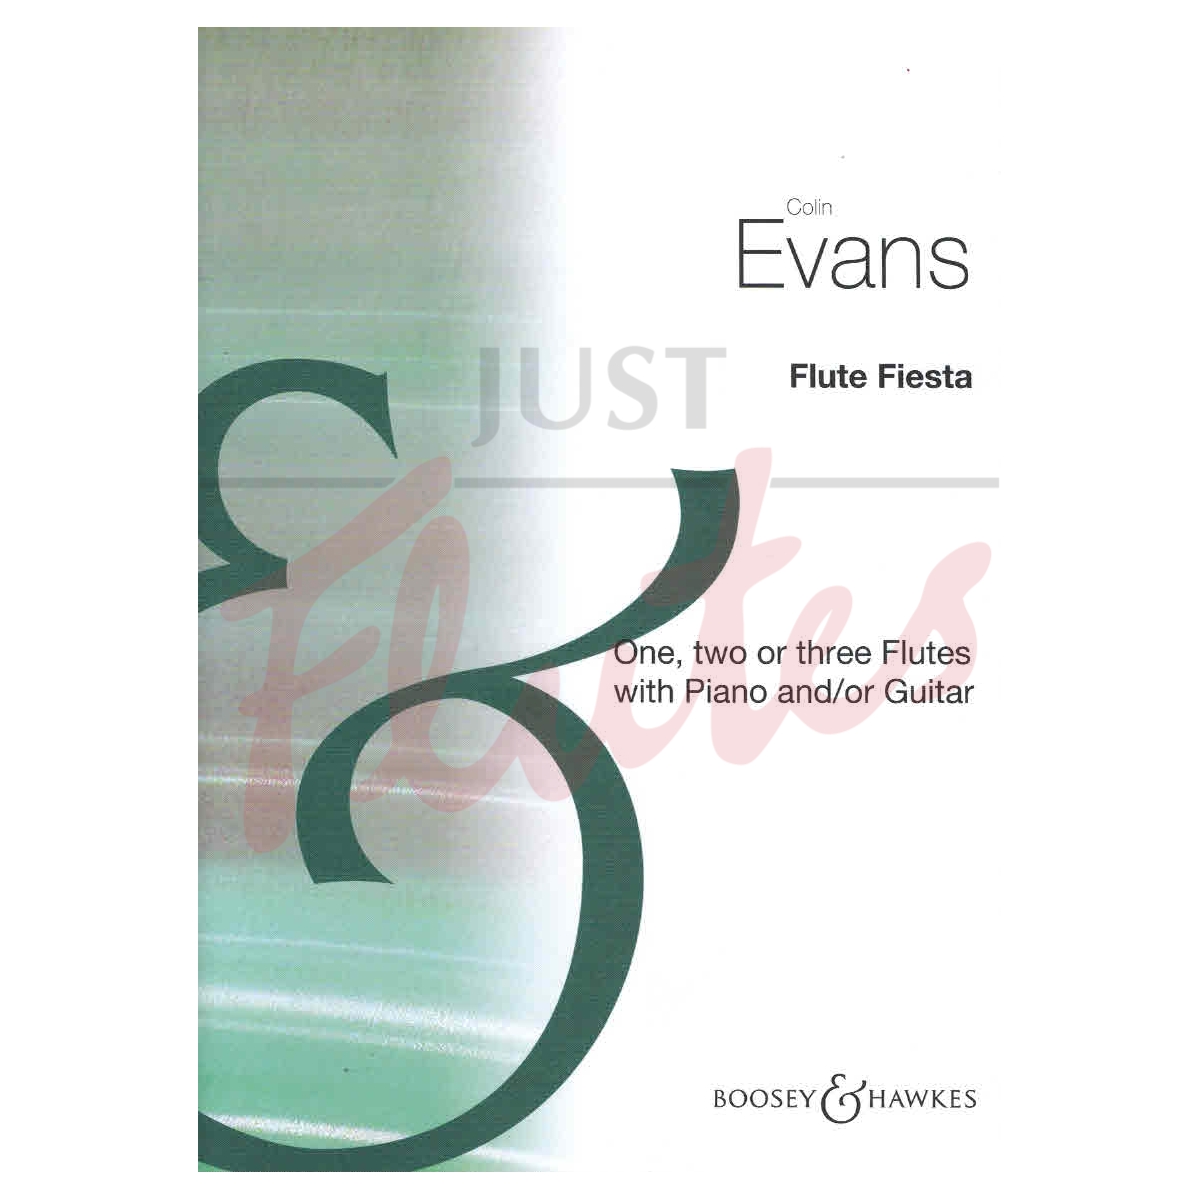 Flute Fiesta for One, Two or Three Flutes and Piano or Guitar